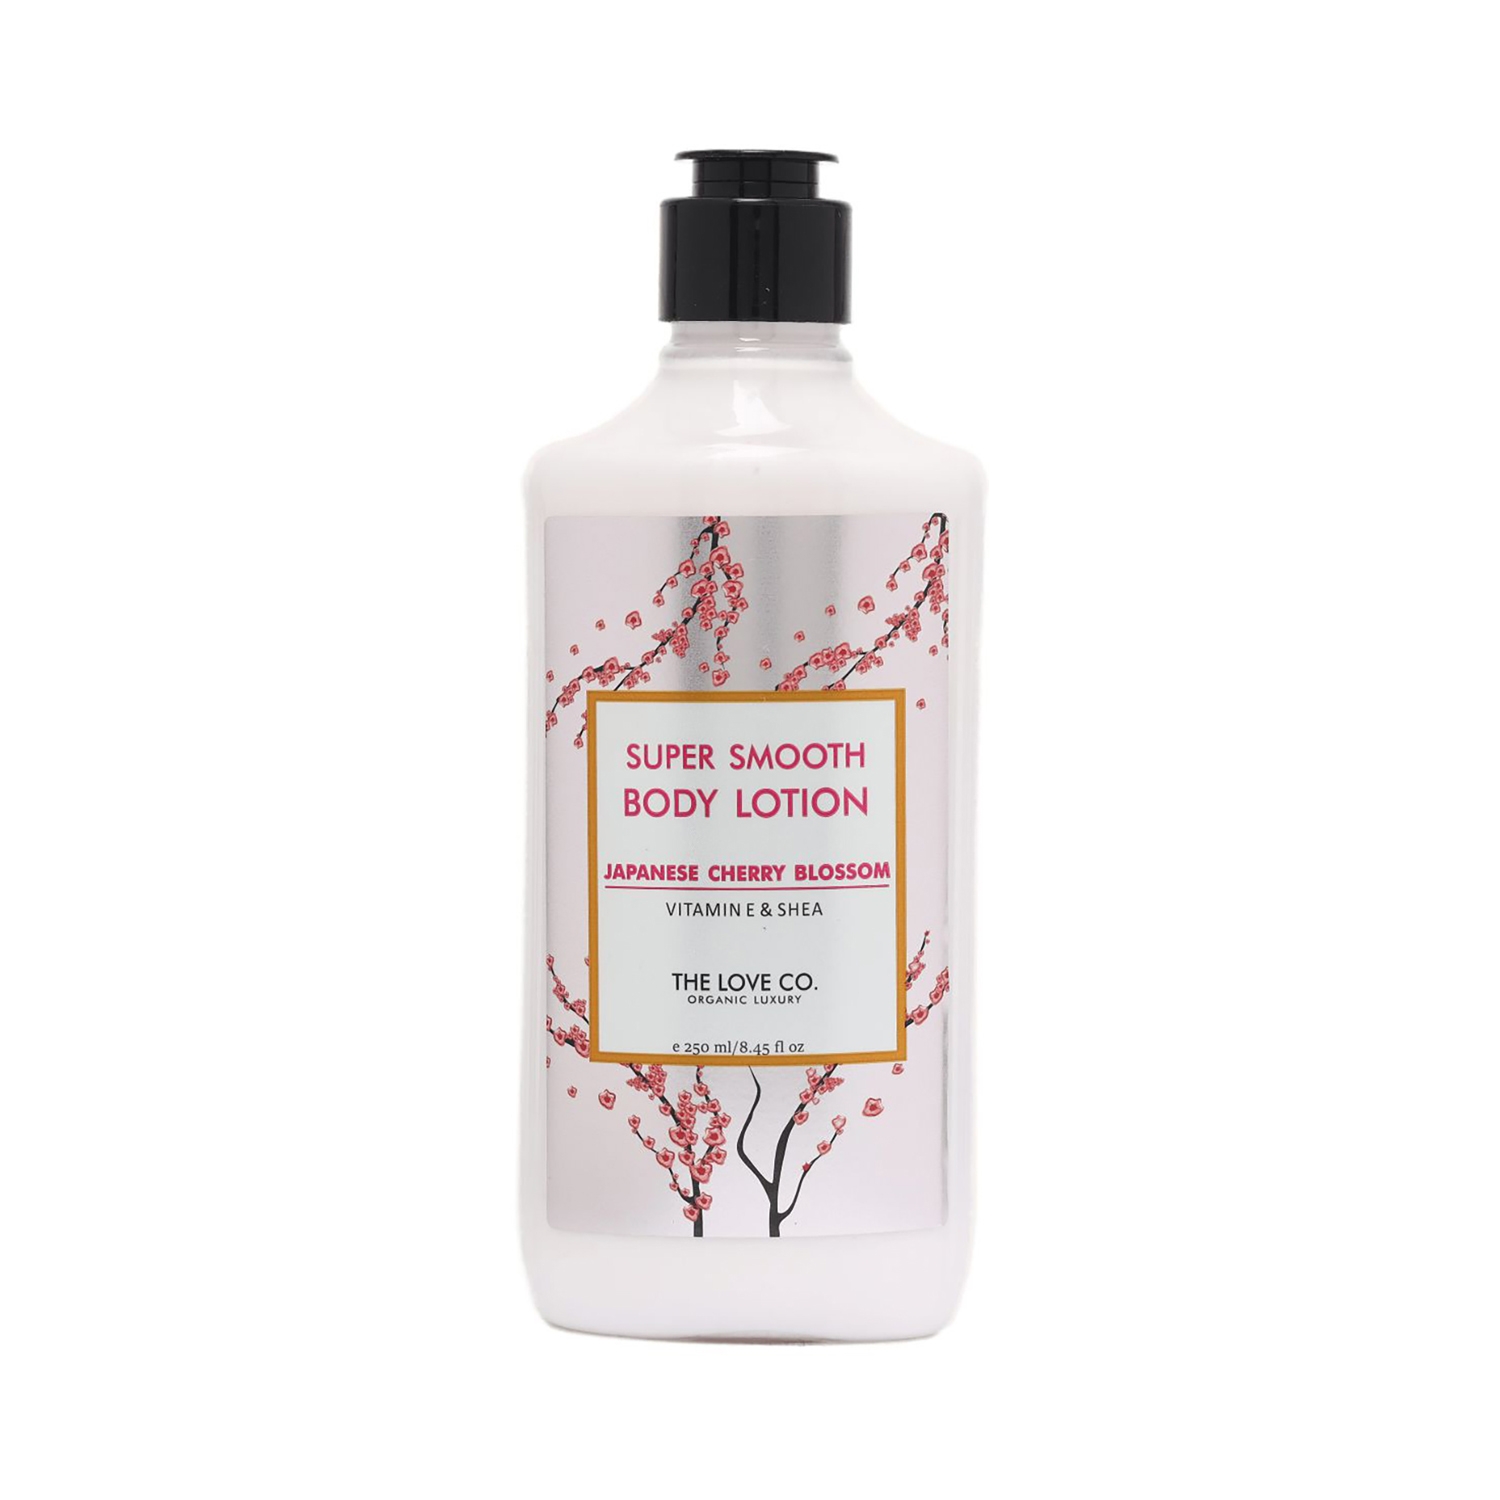 THE LOVE CO. | THE LOVE CO. Super Smooth Japanese Cherry Blossom Daily Moisturizing Body Lotion (250ml)